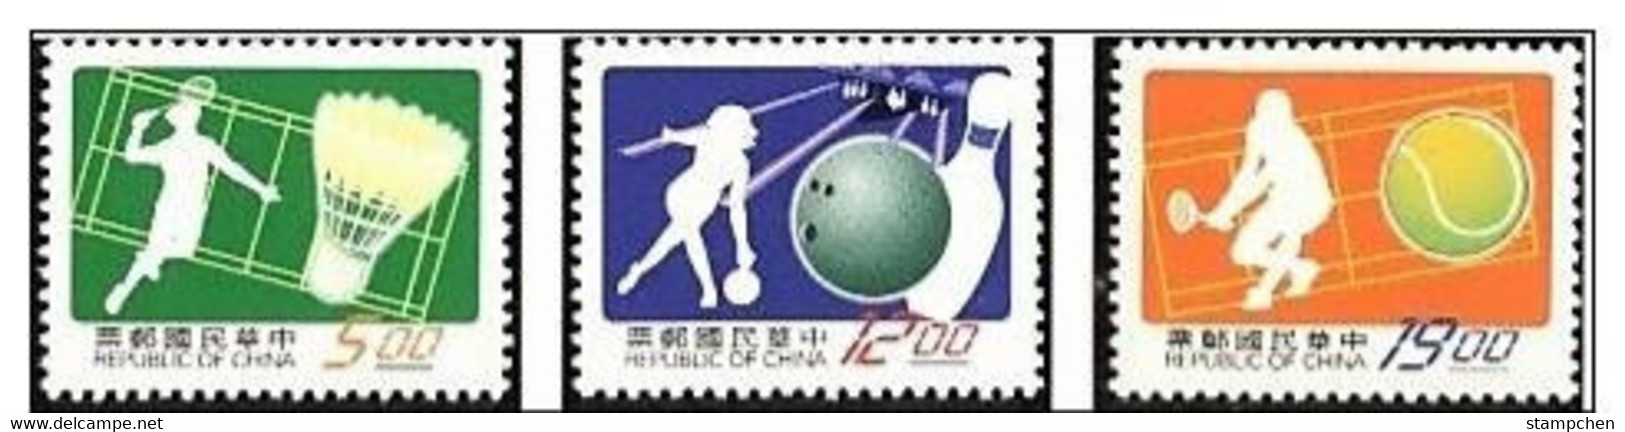 1997 Sport Stamps Badminton Tennis Bowling - Bocce